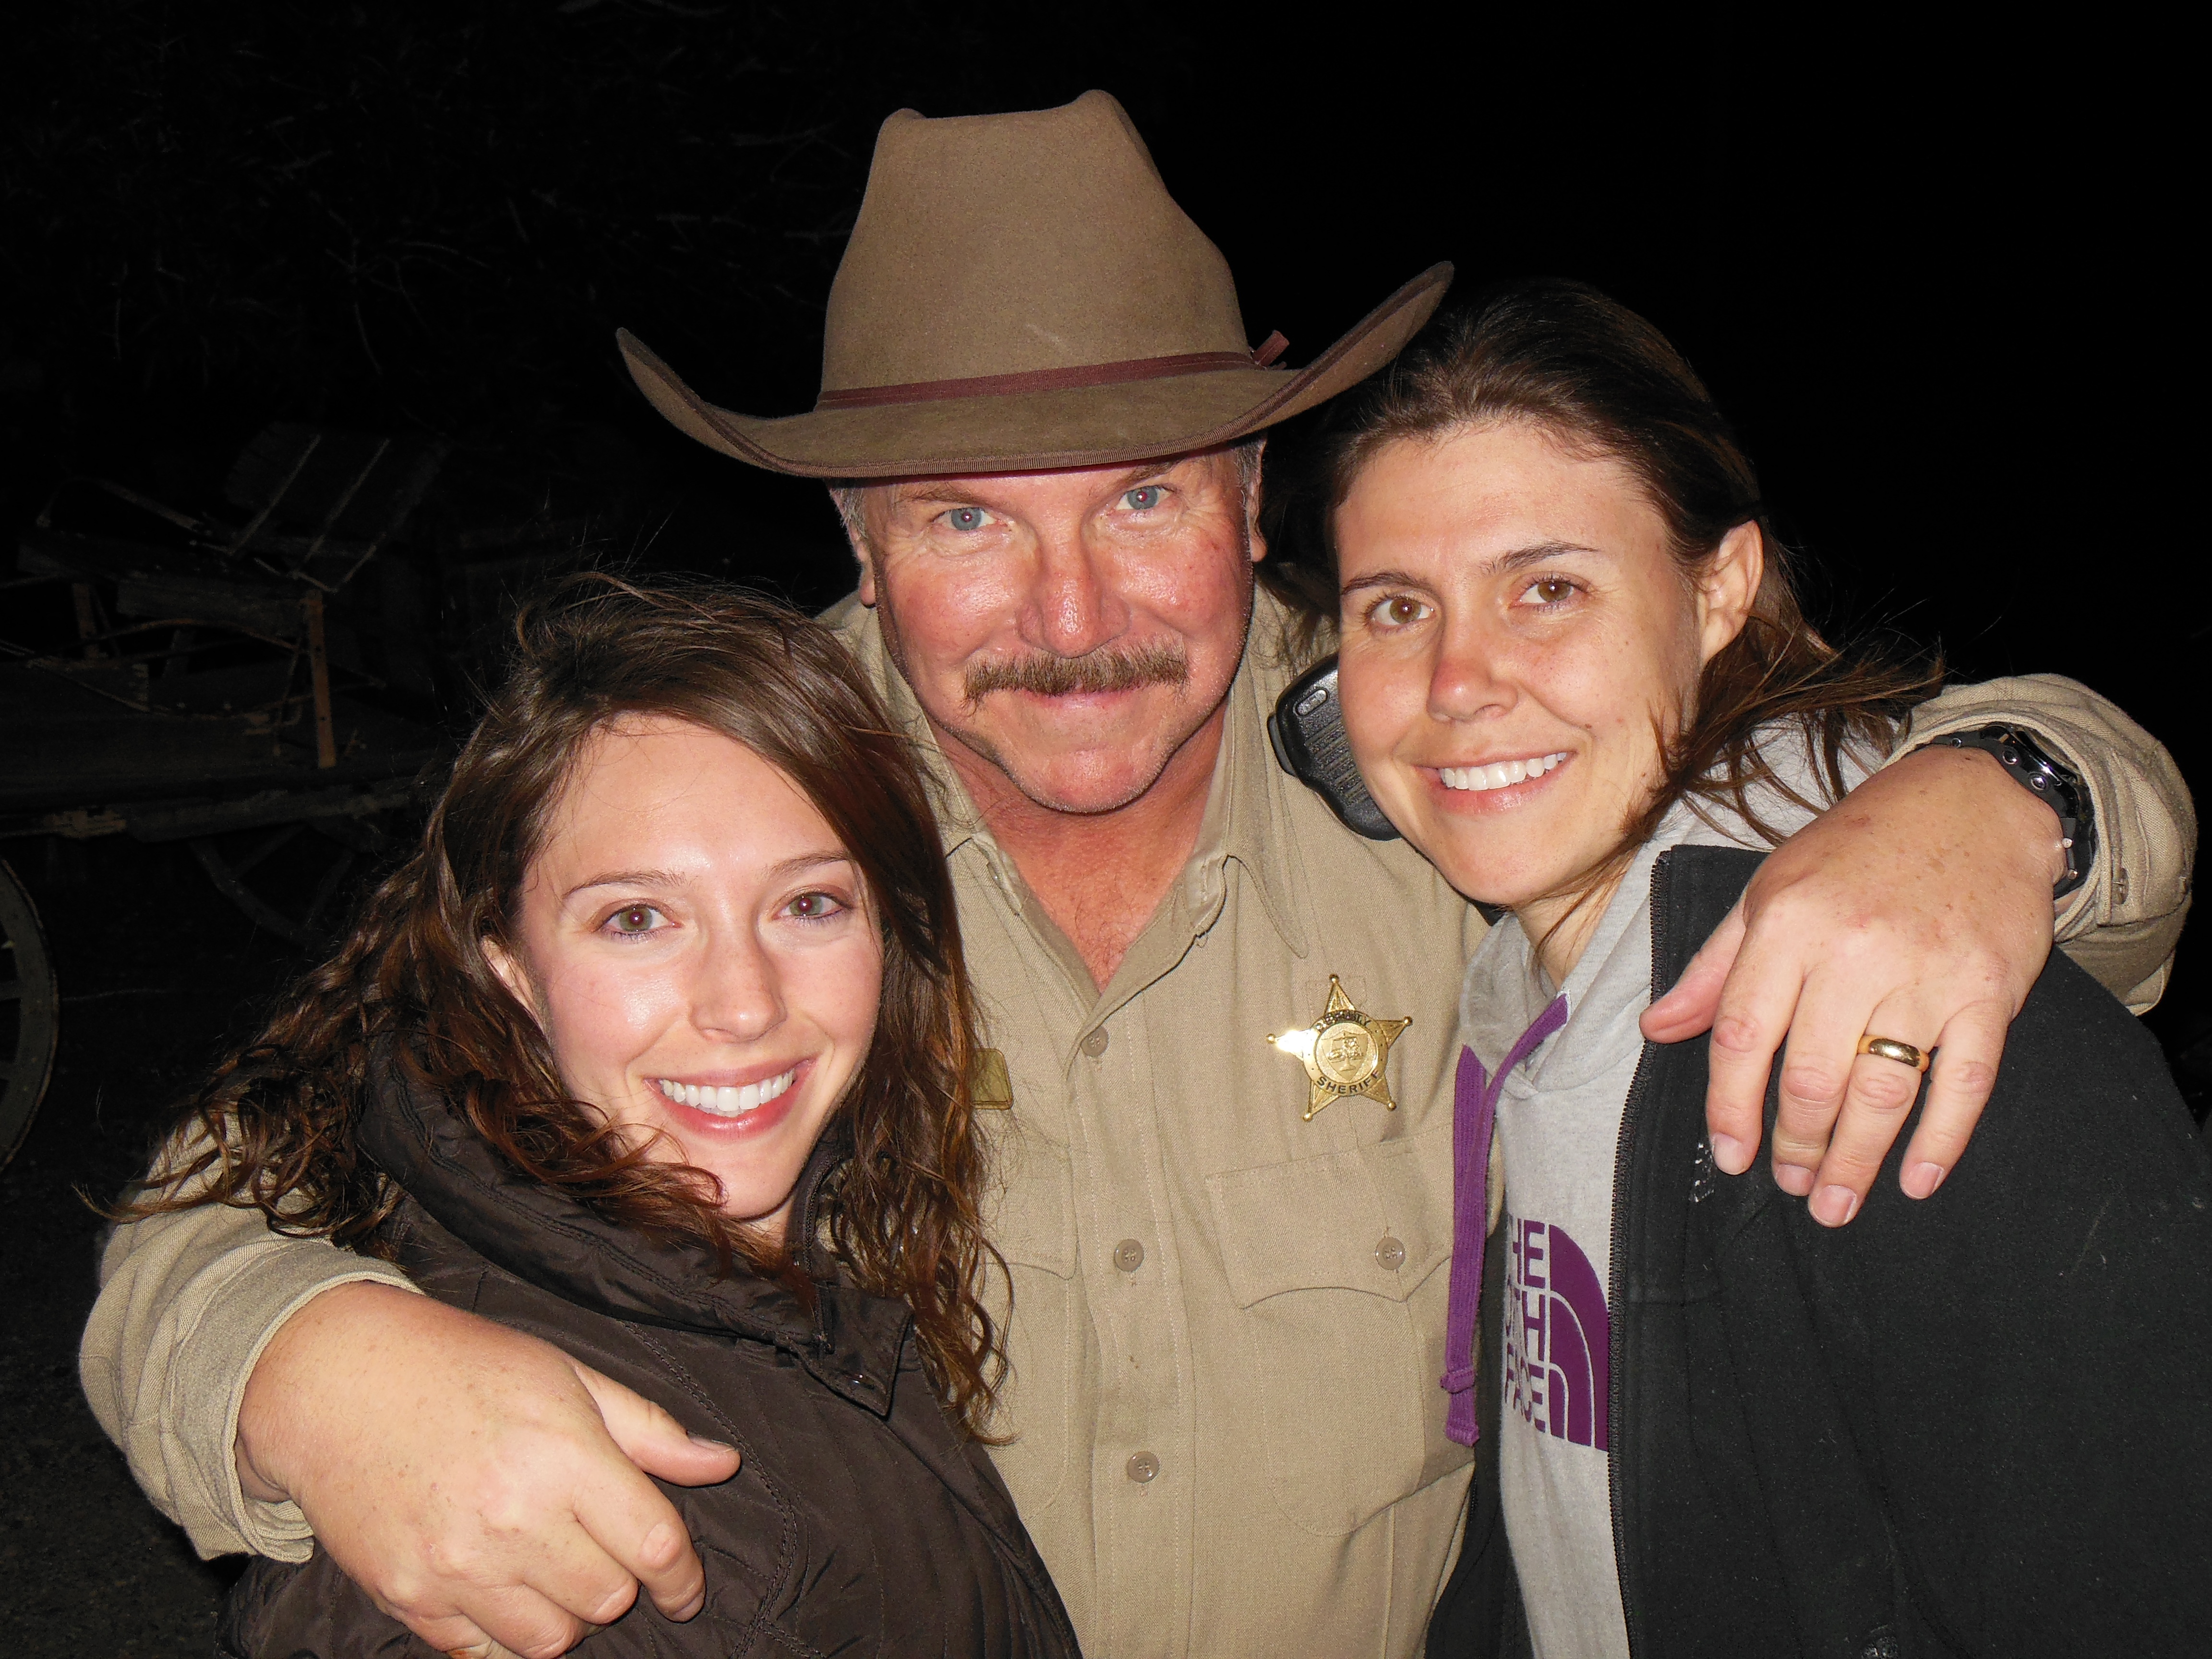 Daniel Knight on set of SAVAGED with Brittney Deutsch (left) and Courtney E. Hayes (right)